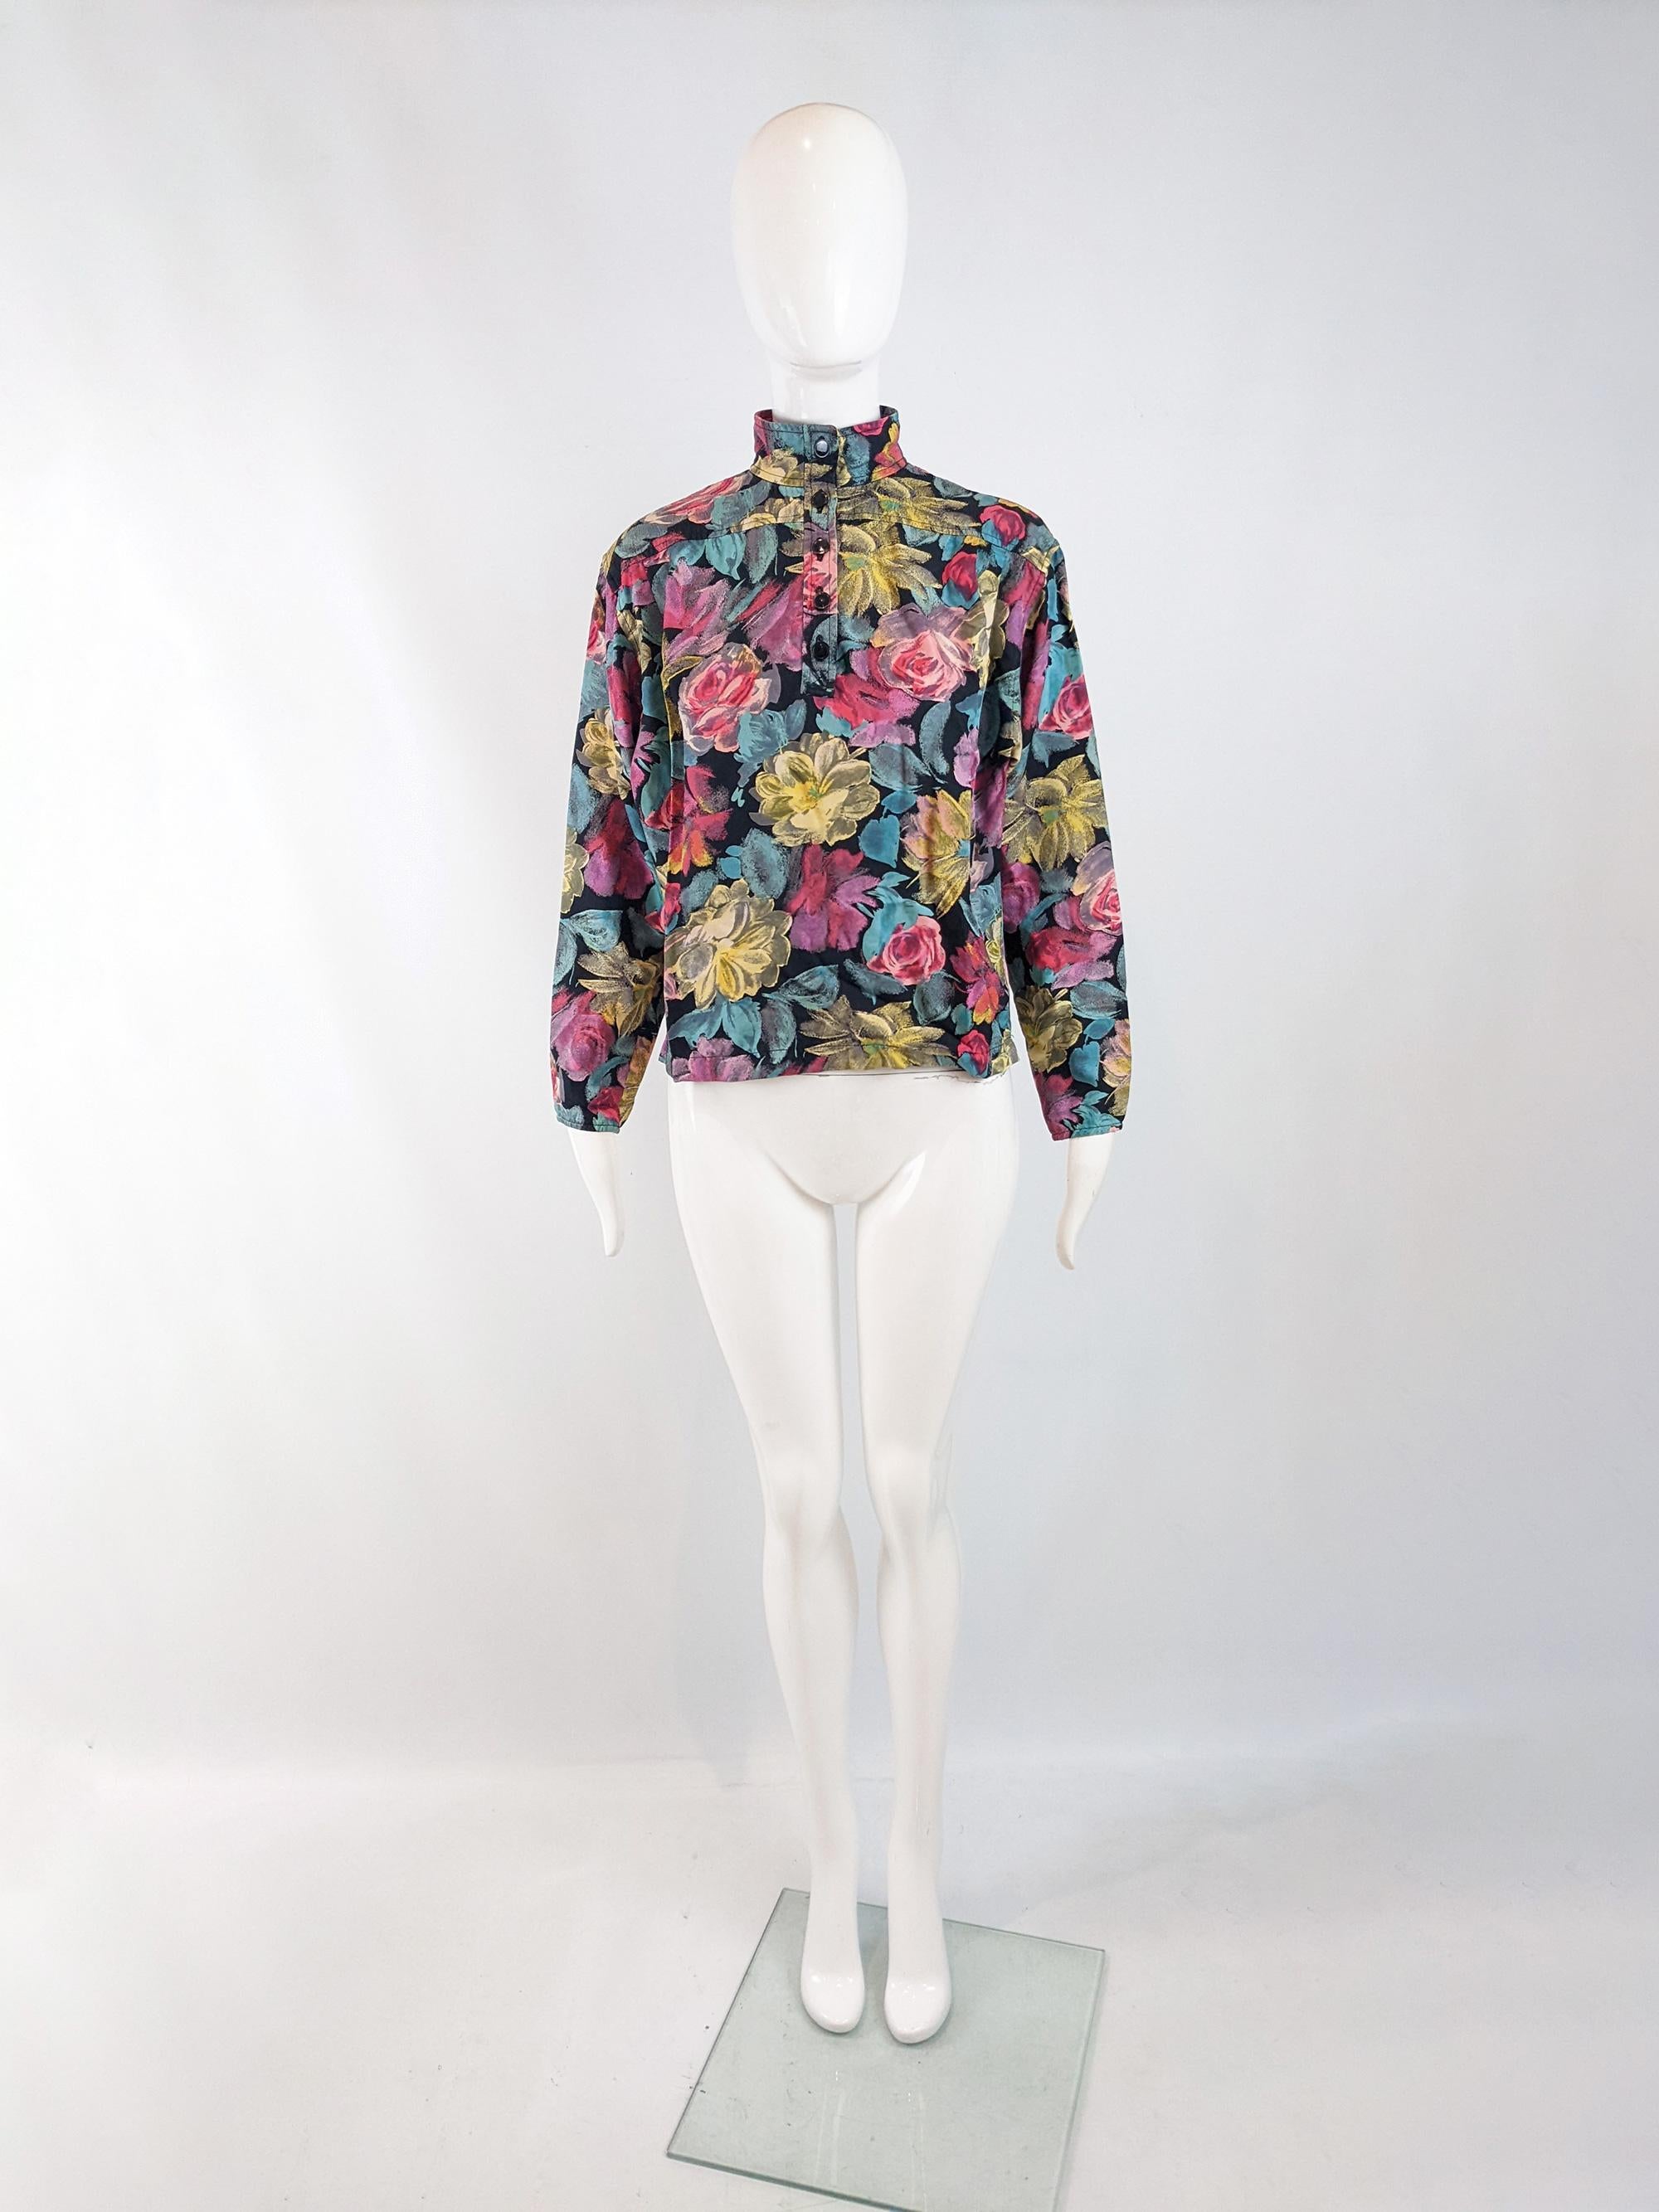 A bold vintage womens blouse from the 80s by luxury fashion designer, Emanuel Ungaro. In a black rayon with a vibrant, multicoloured floral print throughout. It has a batwing sleeve and a glamorous high neck.

Size: Marked vintage US 8 which equates